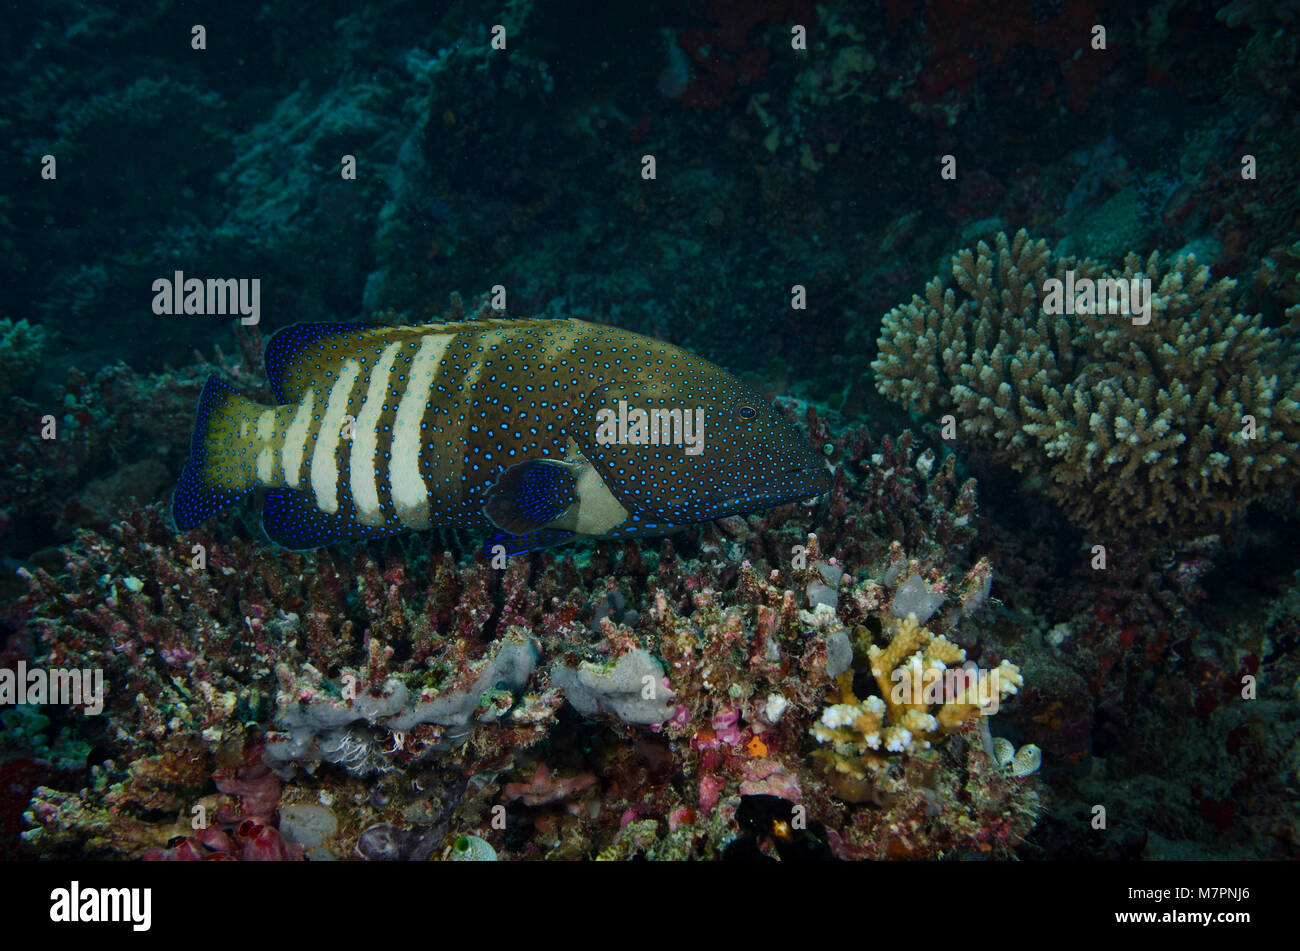 Blue-Spotted Grouper, Cephalopholis Argus, swimming over coral reef in Bathala, Maldives Stock Photo